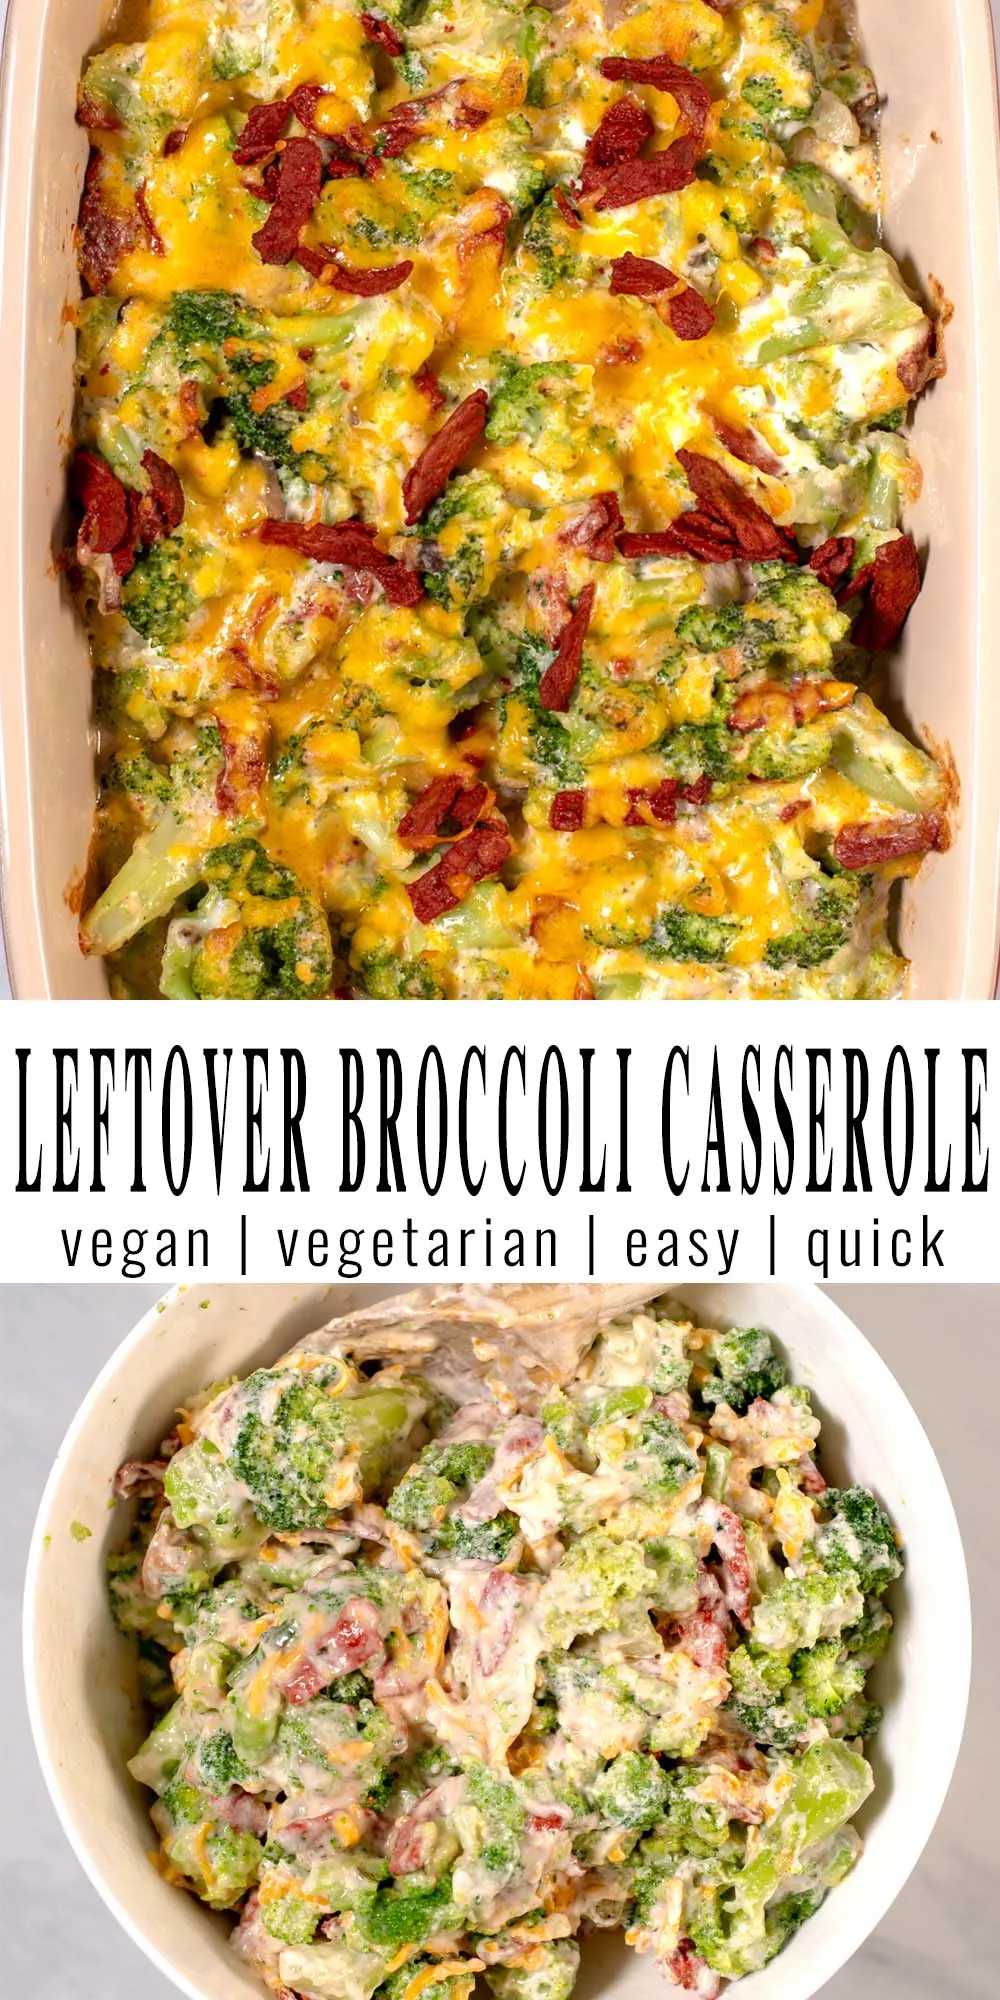 Collage of two photos of Leftover Broccoli Casserole with recipe title text.